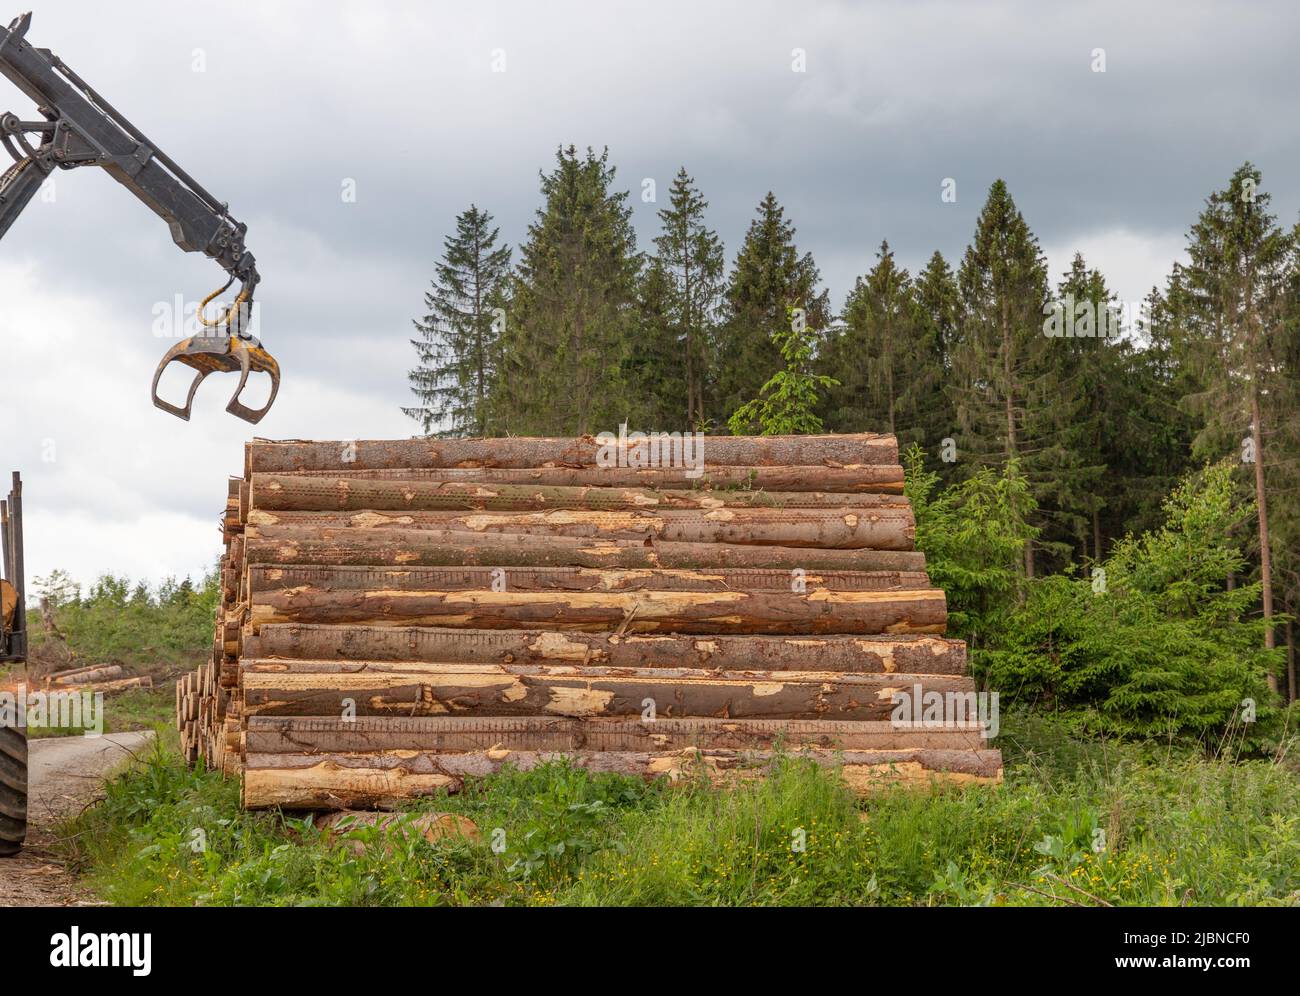 an excavator grab is putting tree tunks on a stack in a forest Stock Photo